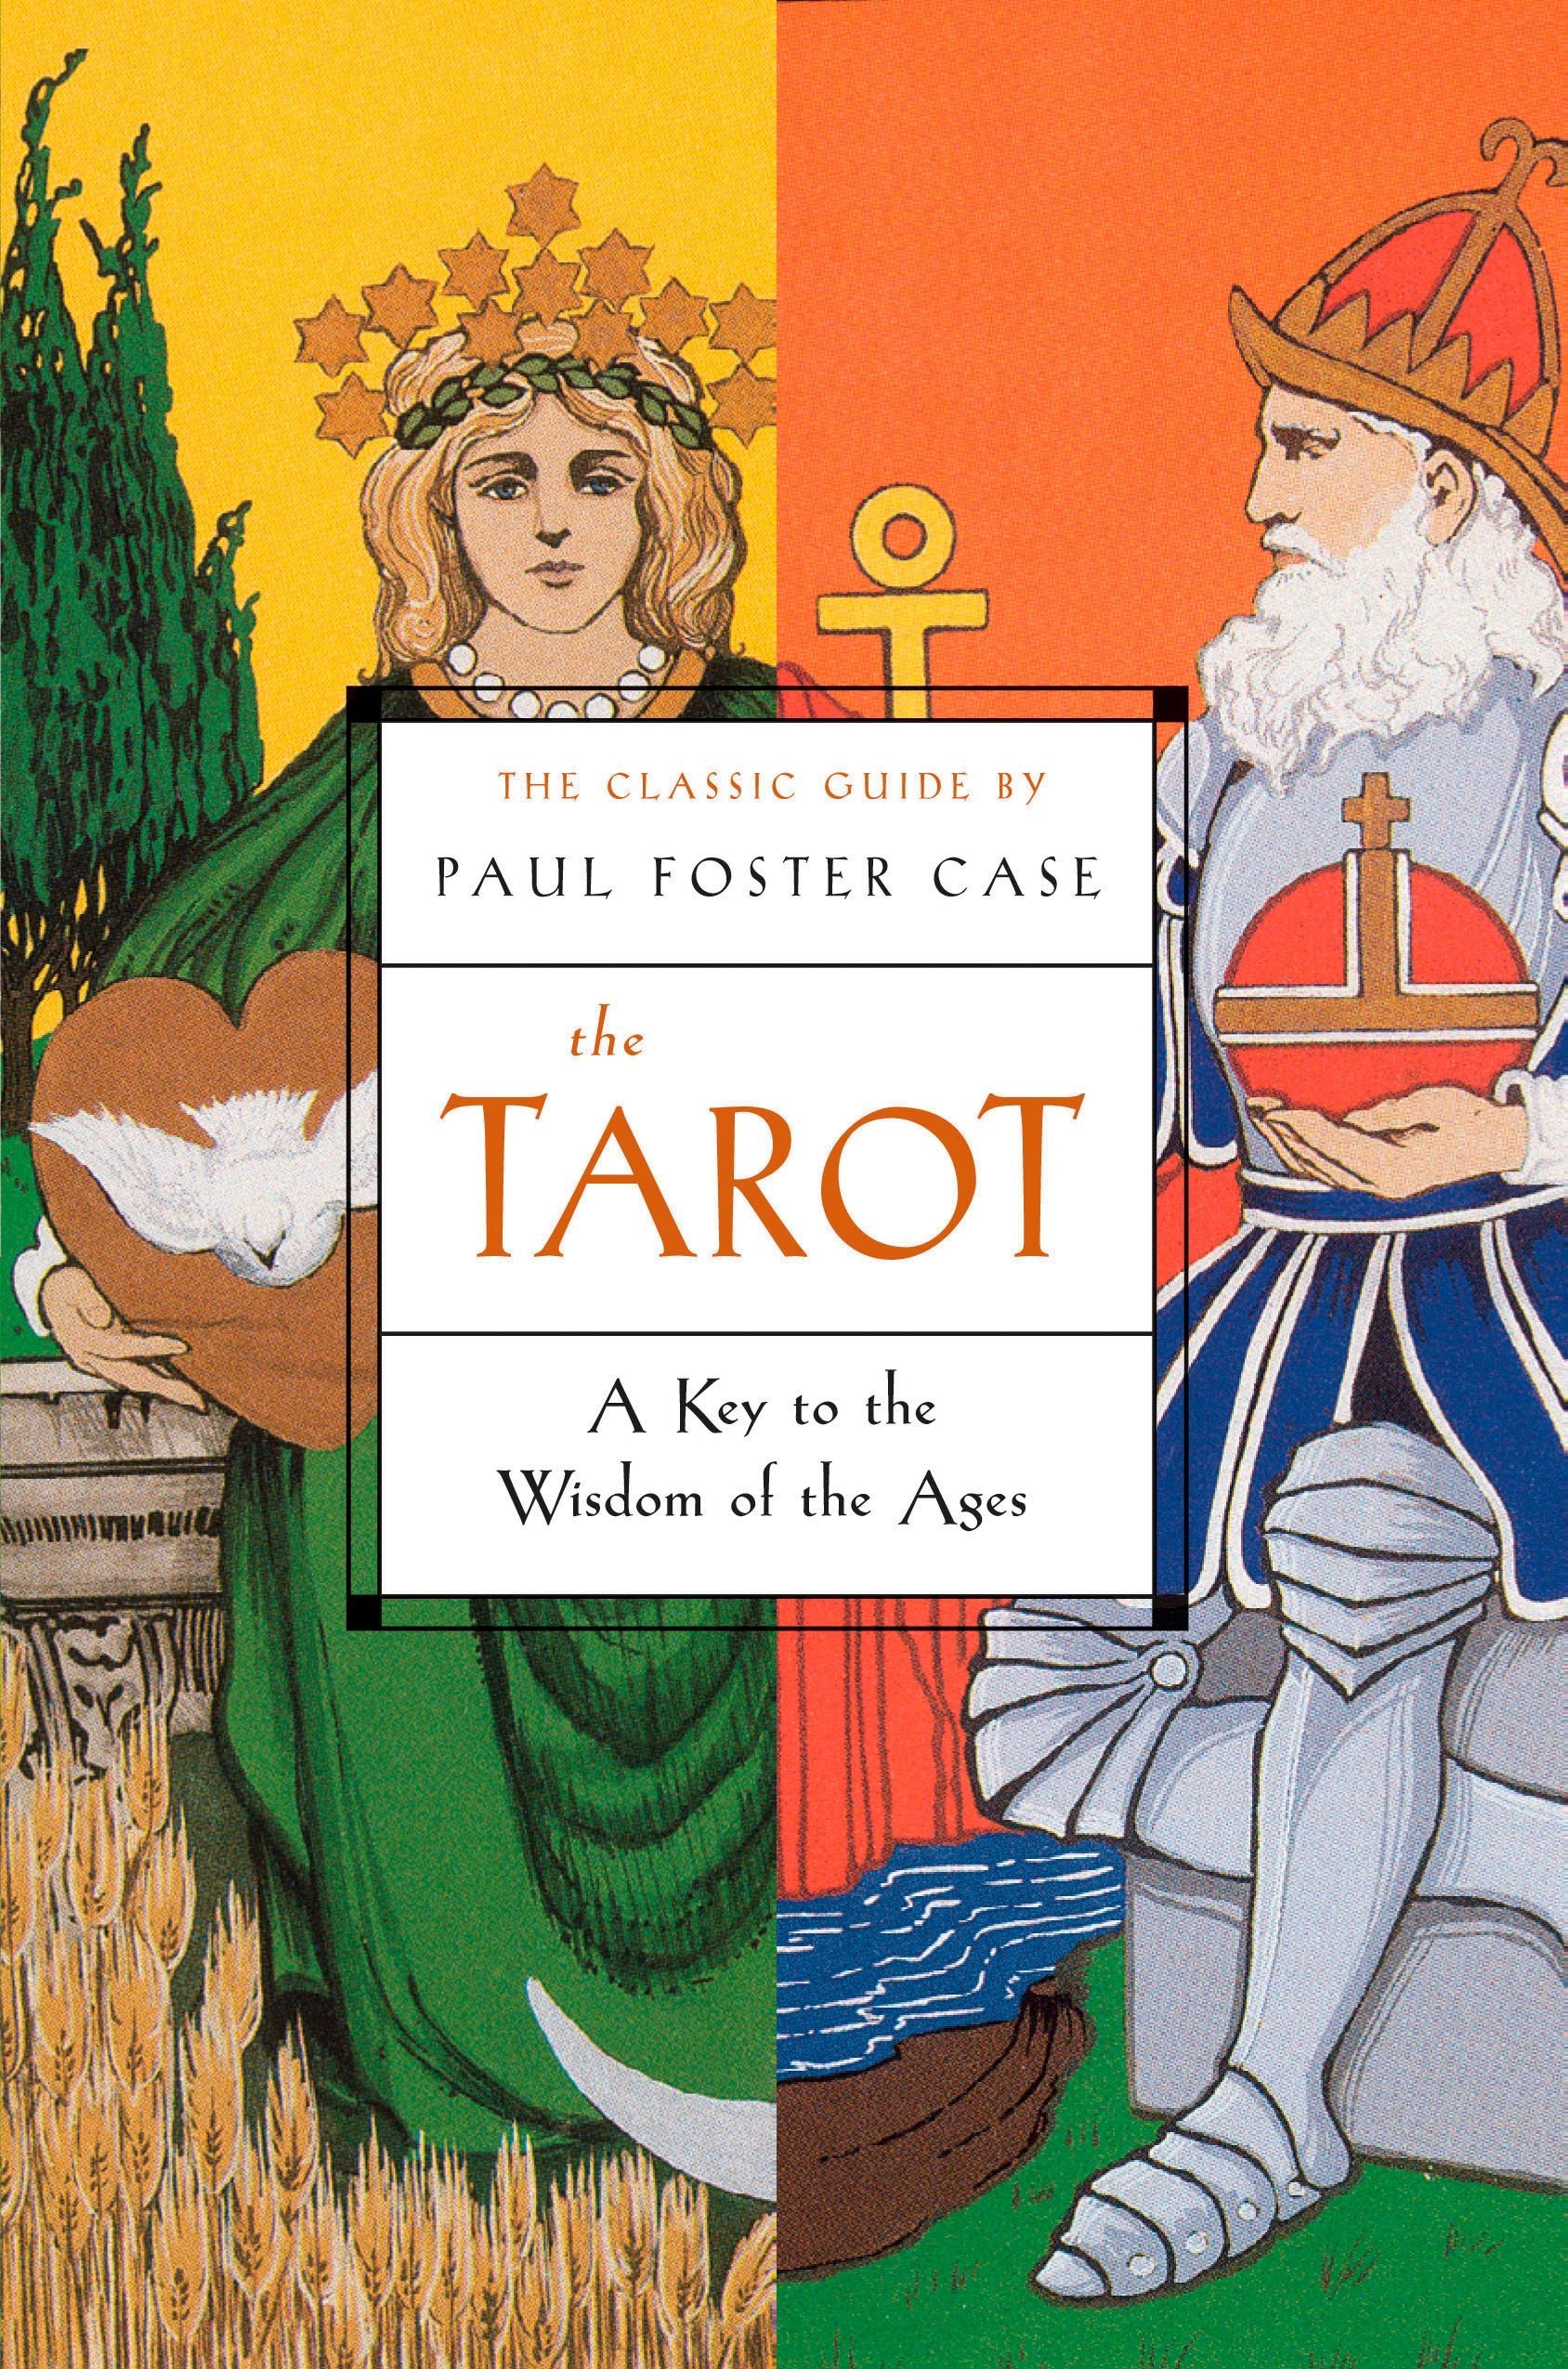 The Tarot - Wisdom of the Ages